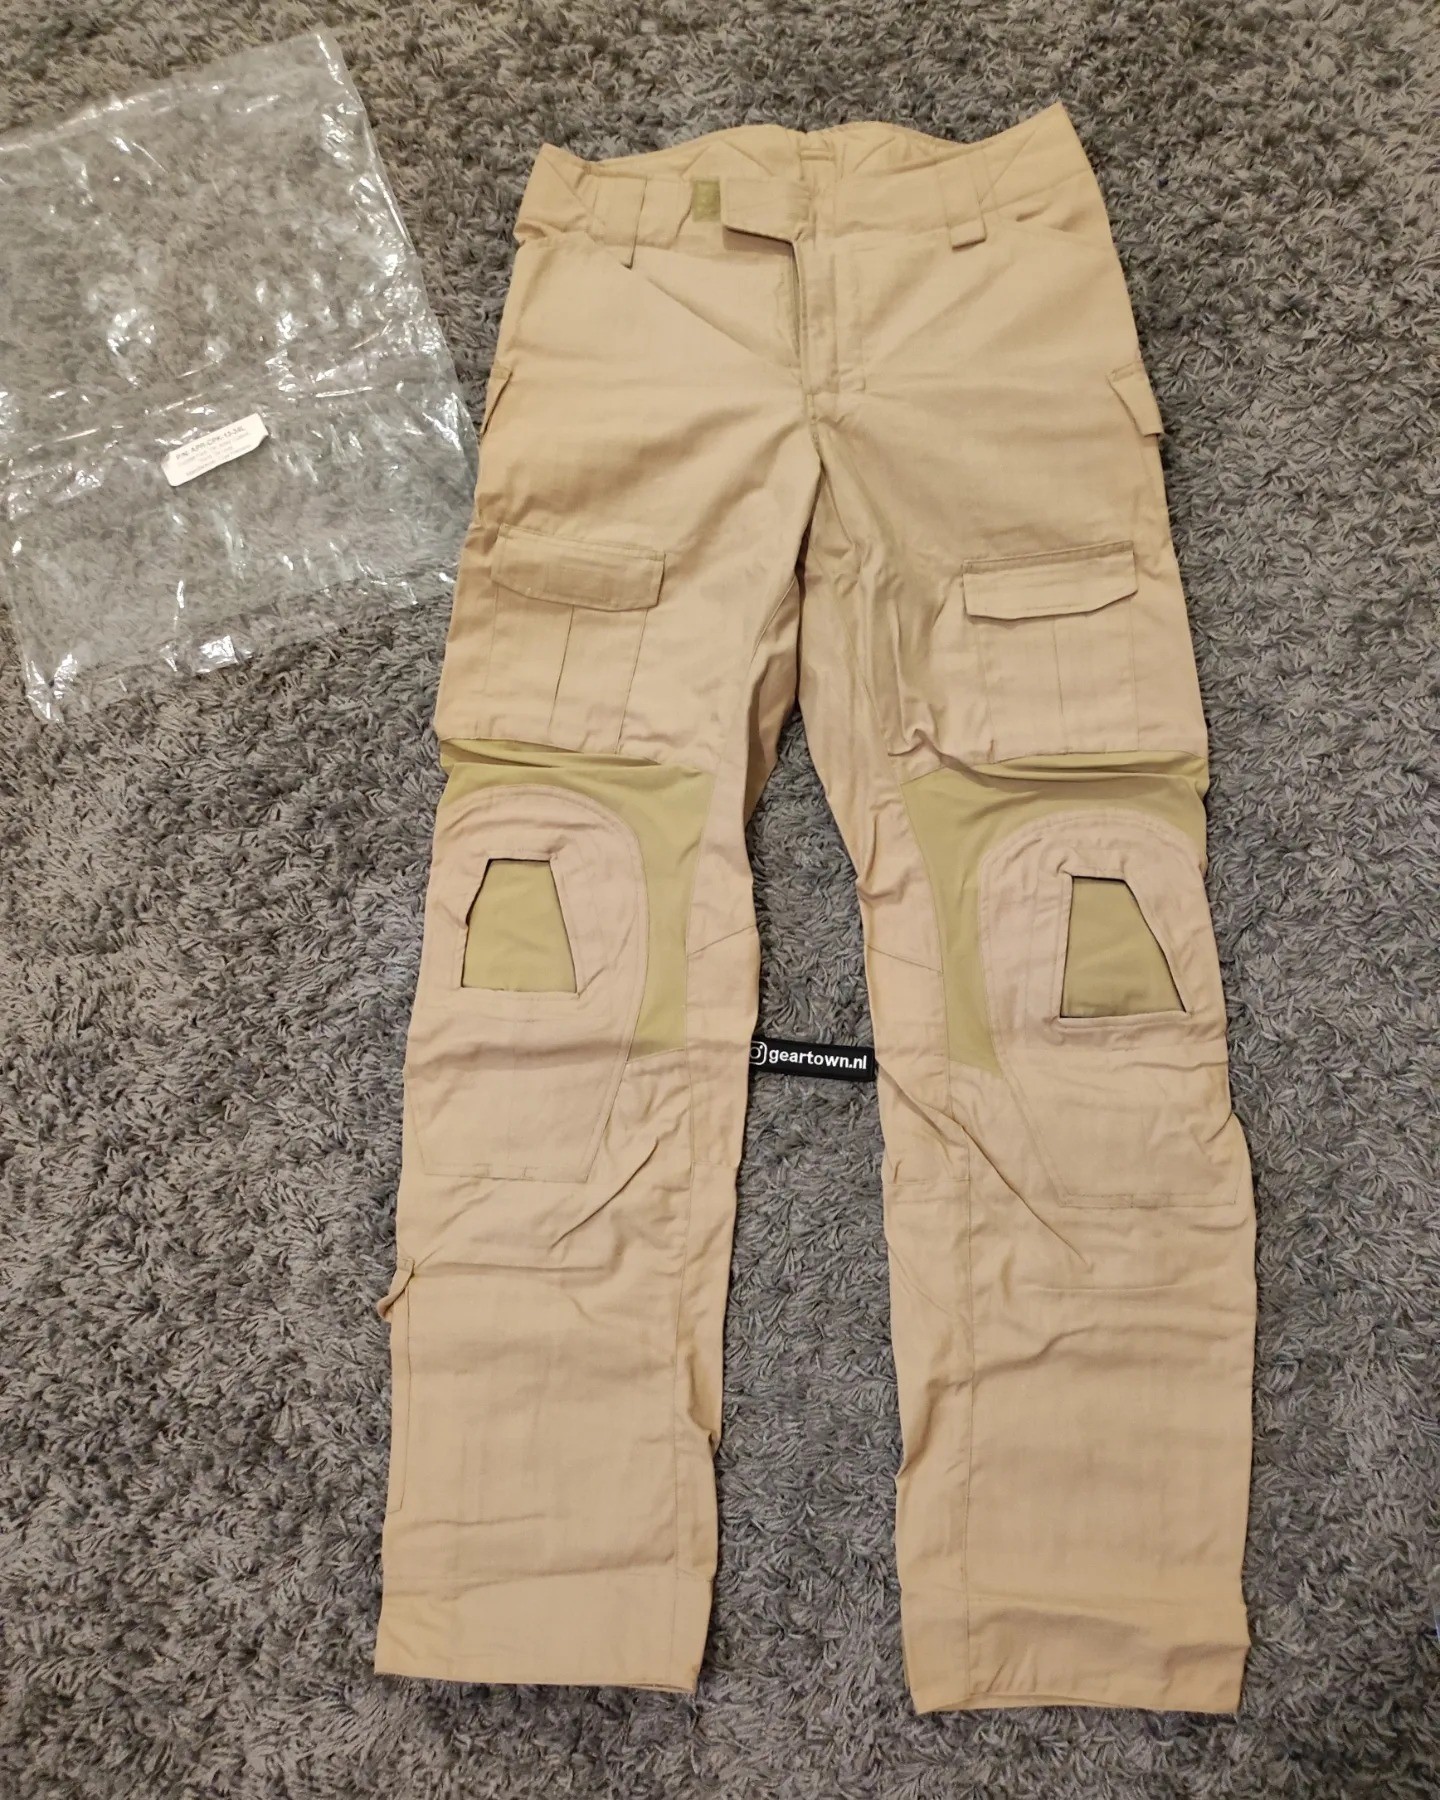 Crye precision cp4 fr combat pants - Airsoft Bazaar